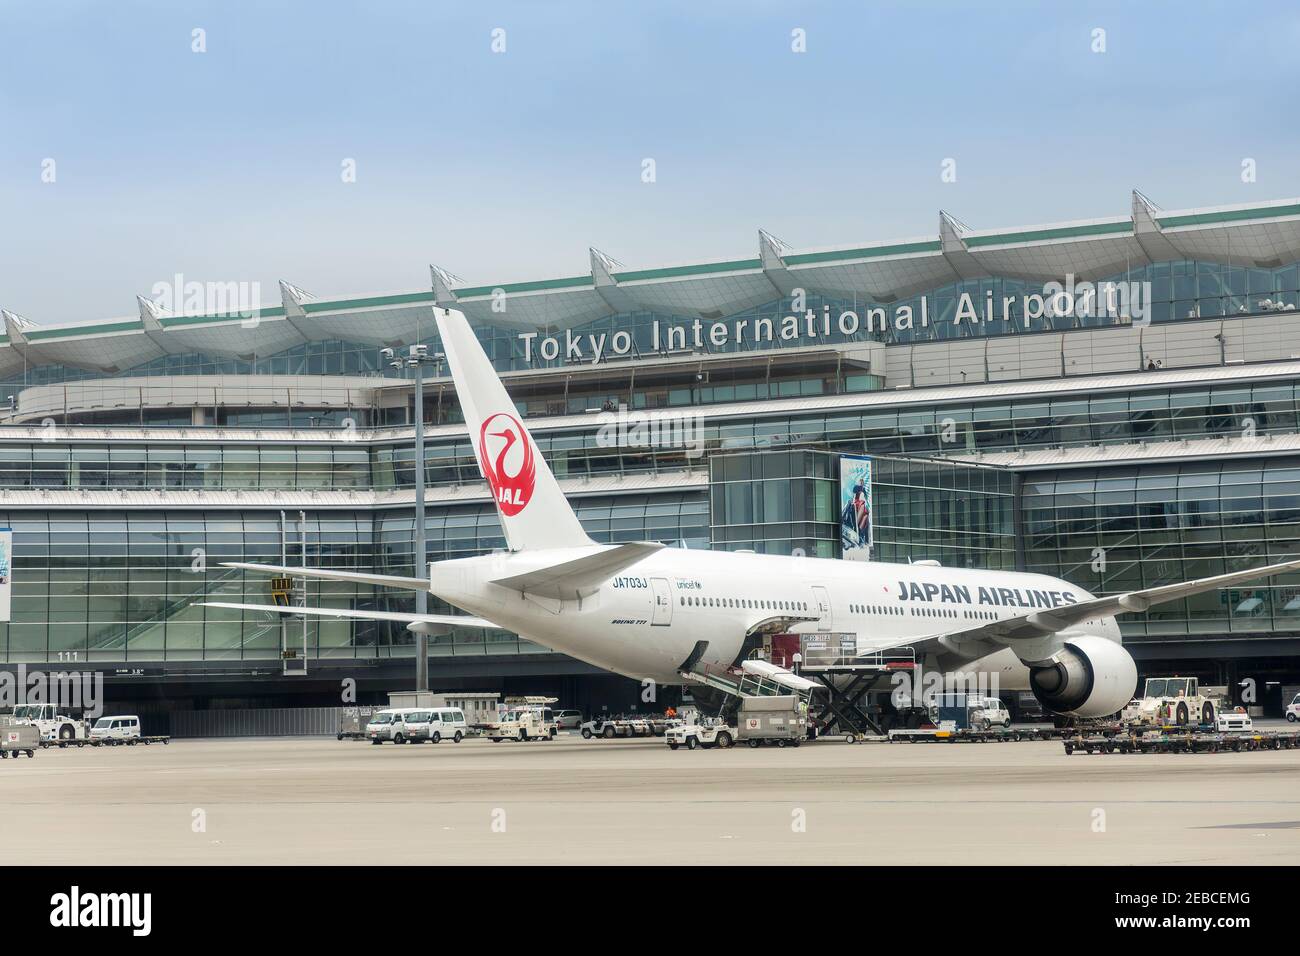 Japan Airlines Boeing 777 at the terminal, Tokyo International Airport, Japan Stock Photo